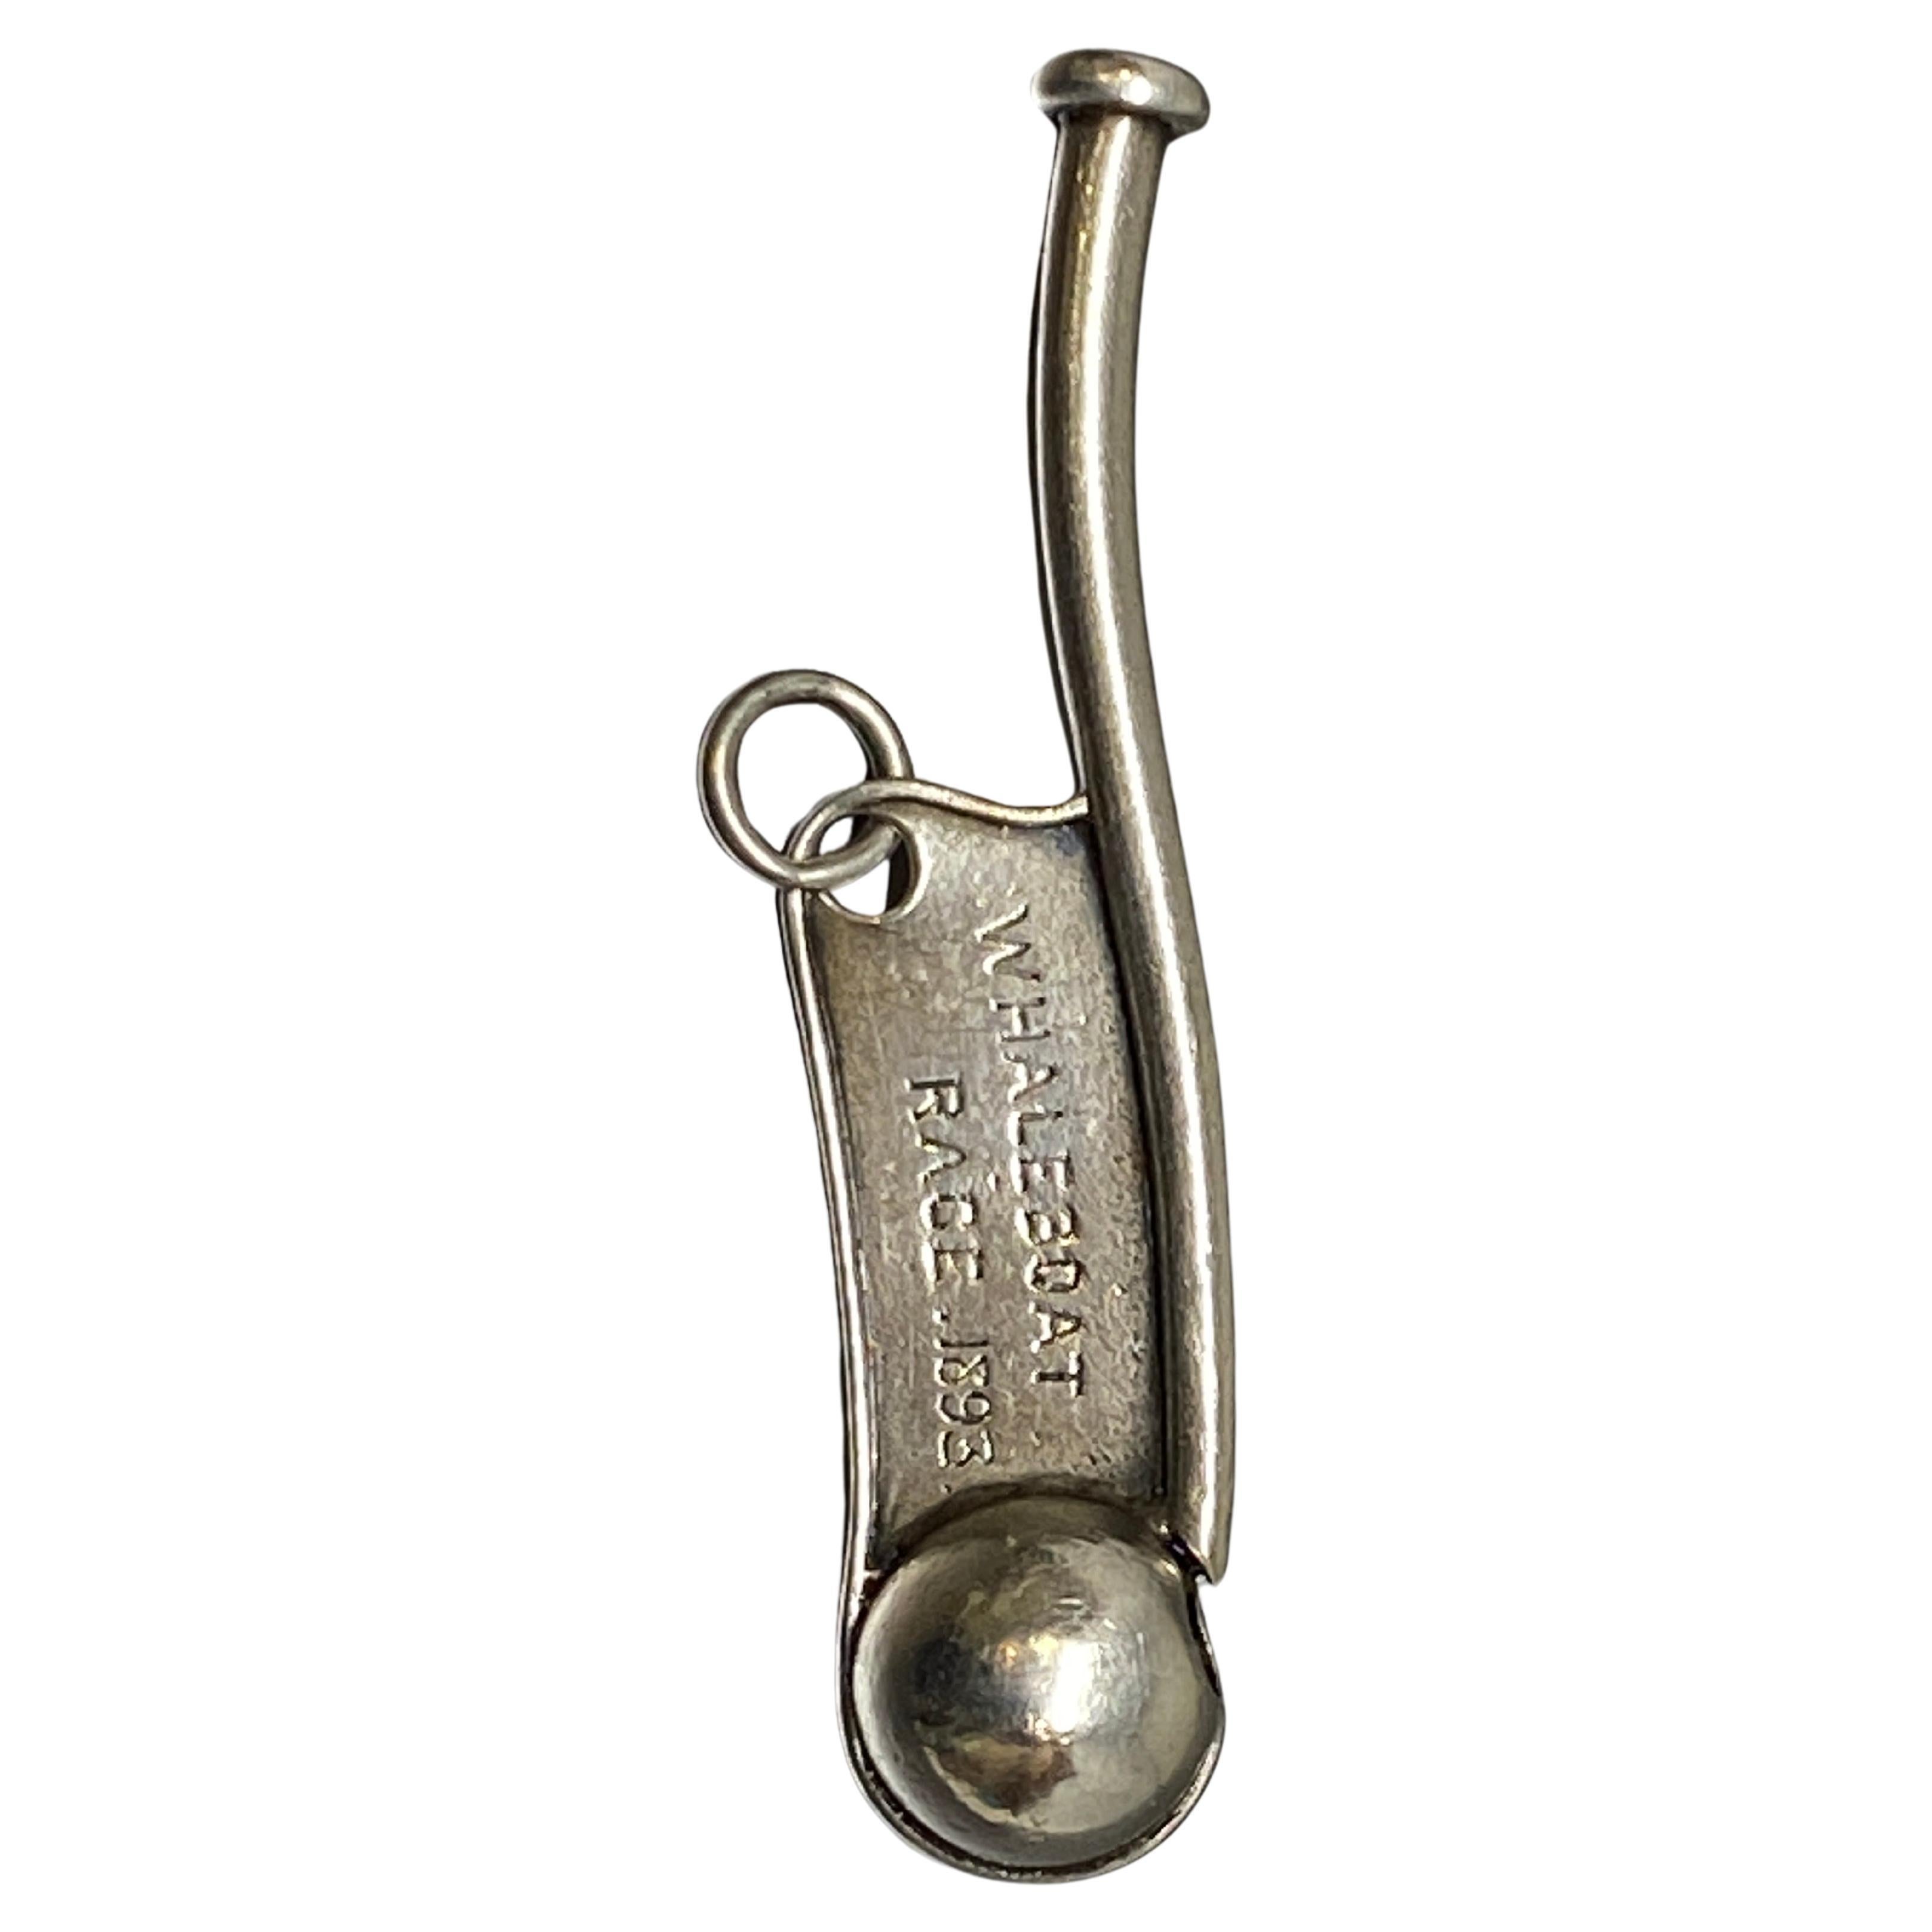 Up for your consideration is this sterling silver gold bosun call or boatswain whistle made by Tiffany & Co.

A bosun or boatswain ranks as the top position or petty officer on the deck of a boat and these whistles were used to communicate to other